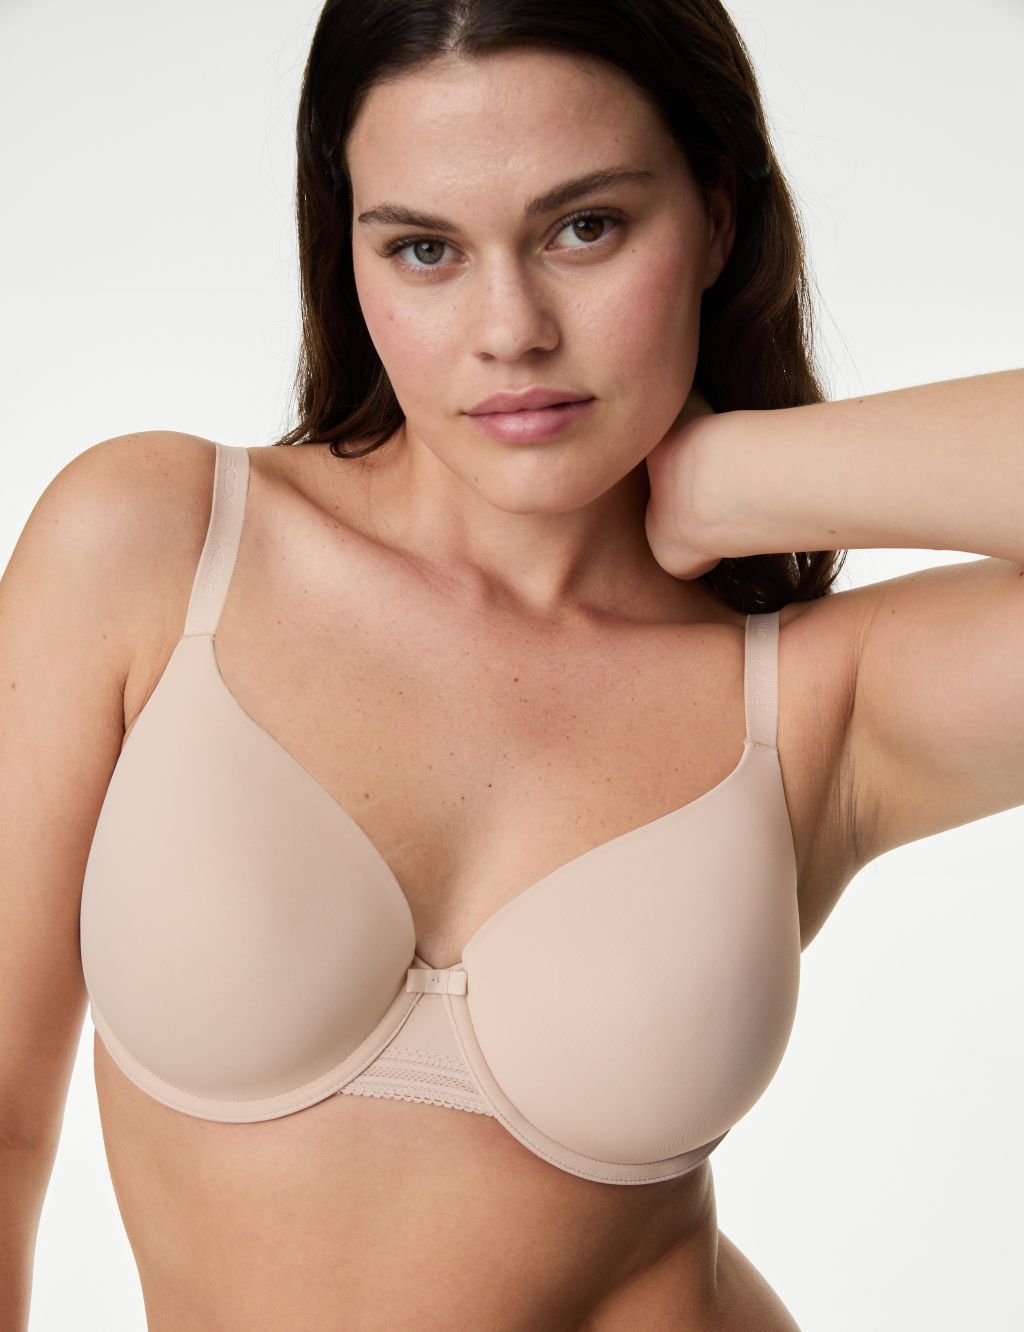 LADIES MARKS AND Spencer Full Cup Boutique Bra. Size 28DD £16.00